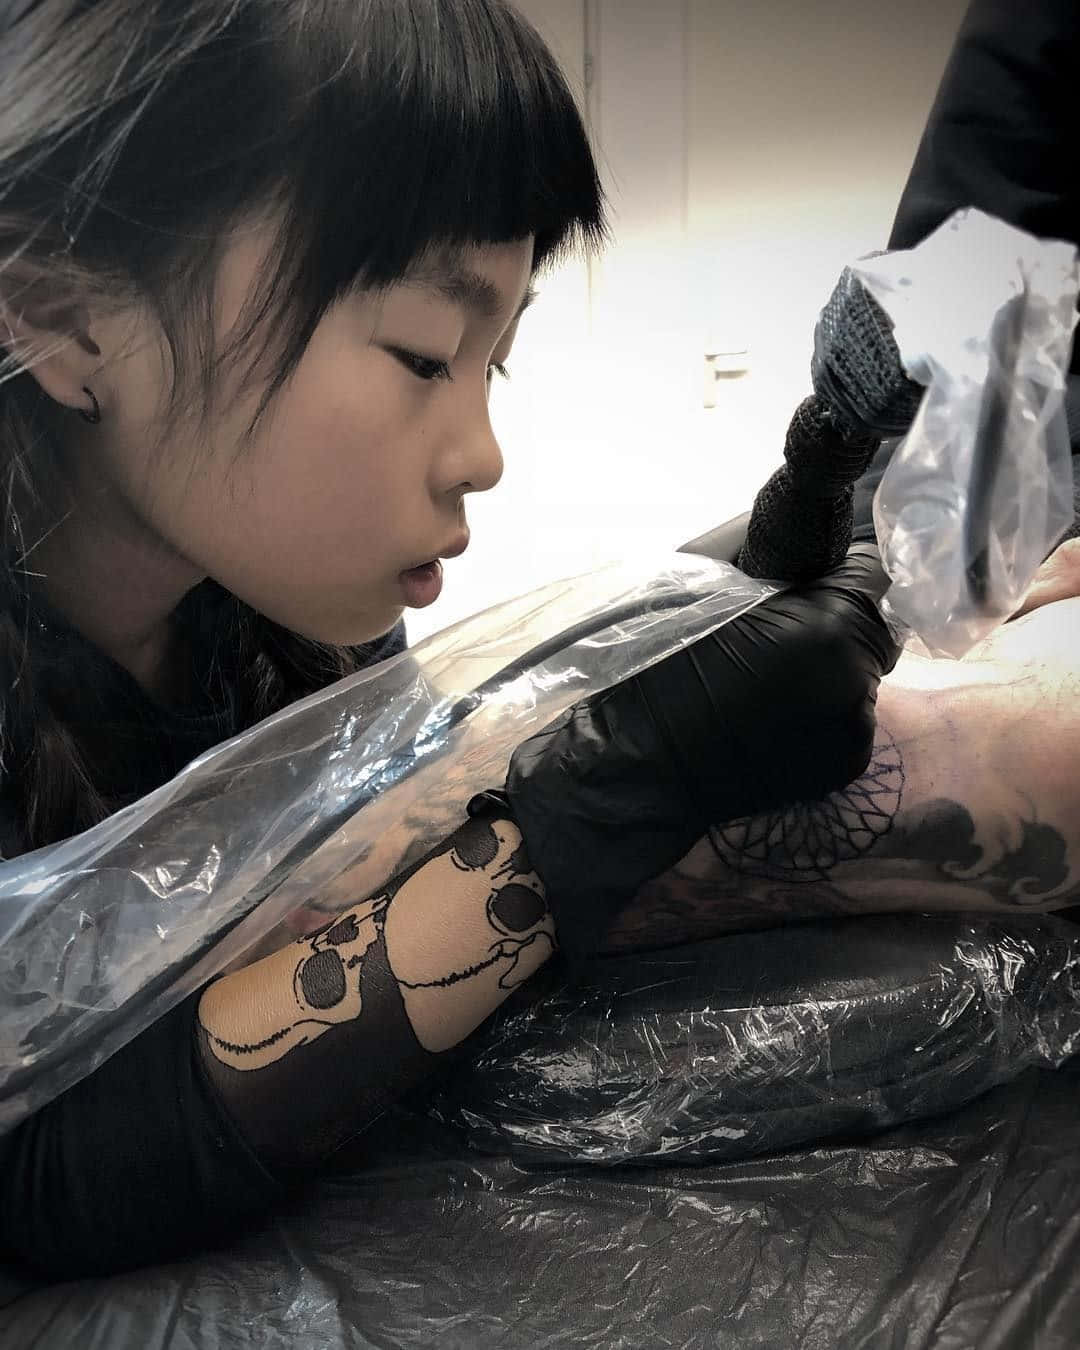 A Girl Getting Tattooed On Her Arm